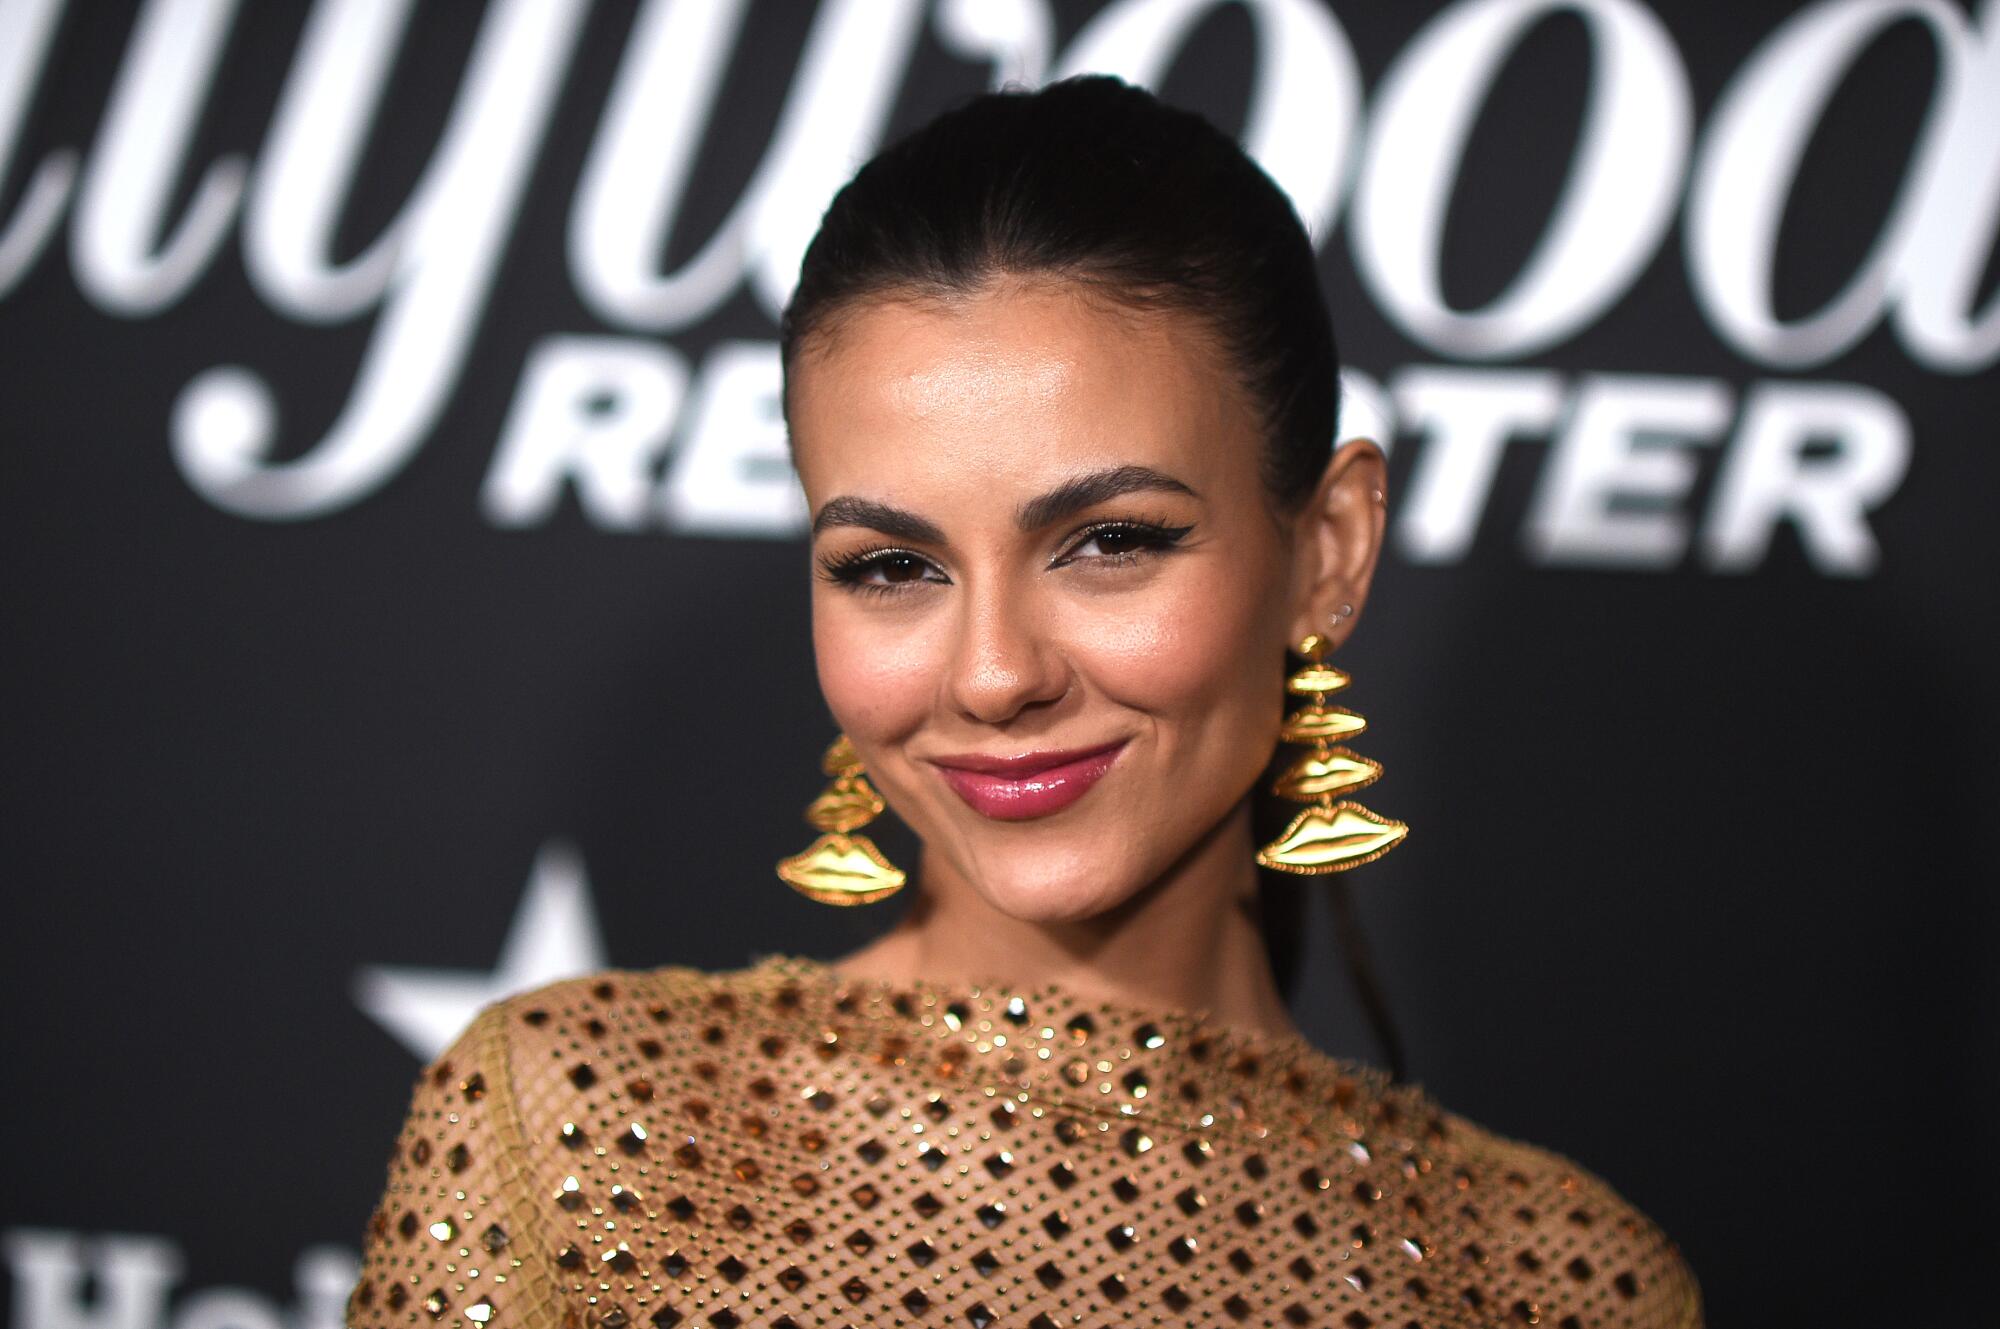 Victoria Justice, shown from the shoulders up, wears a sequined gold dress and statement earrings. 